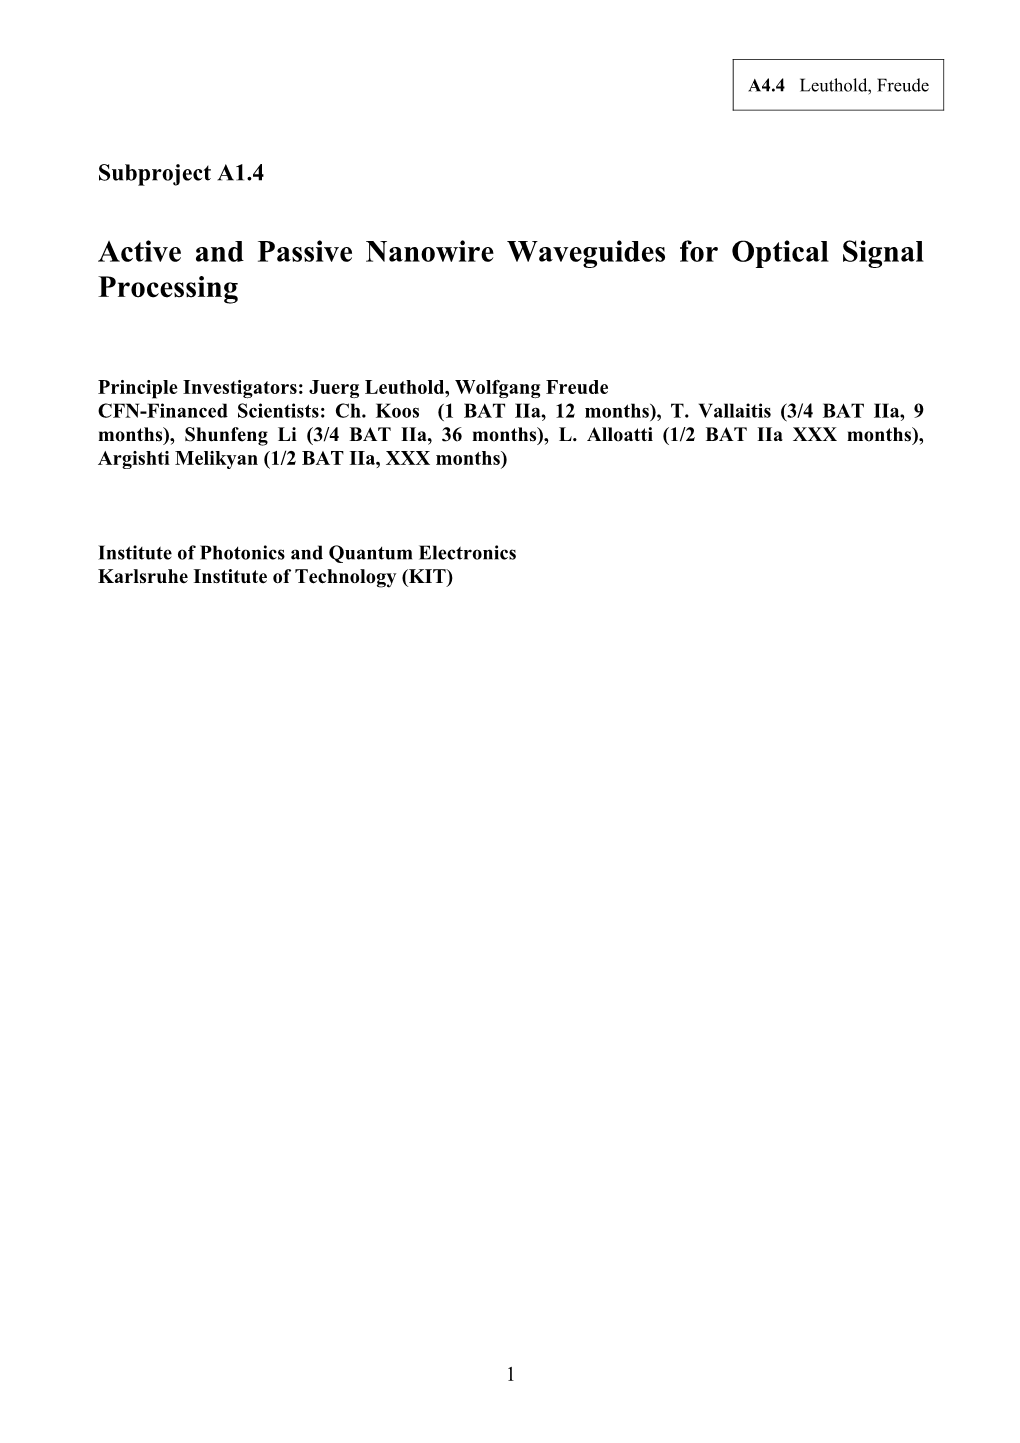 Active and Passive Nanowire Waveguides for Optical Signal Processing